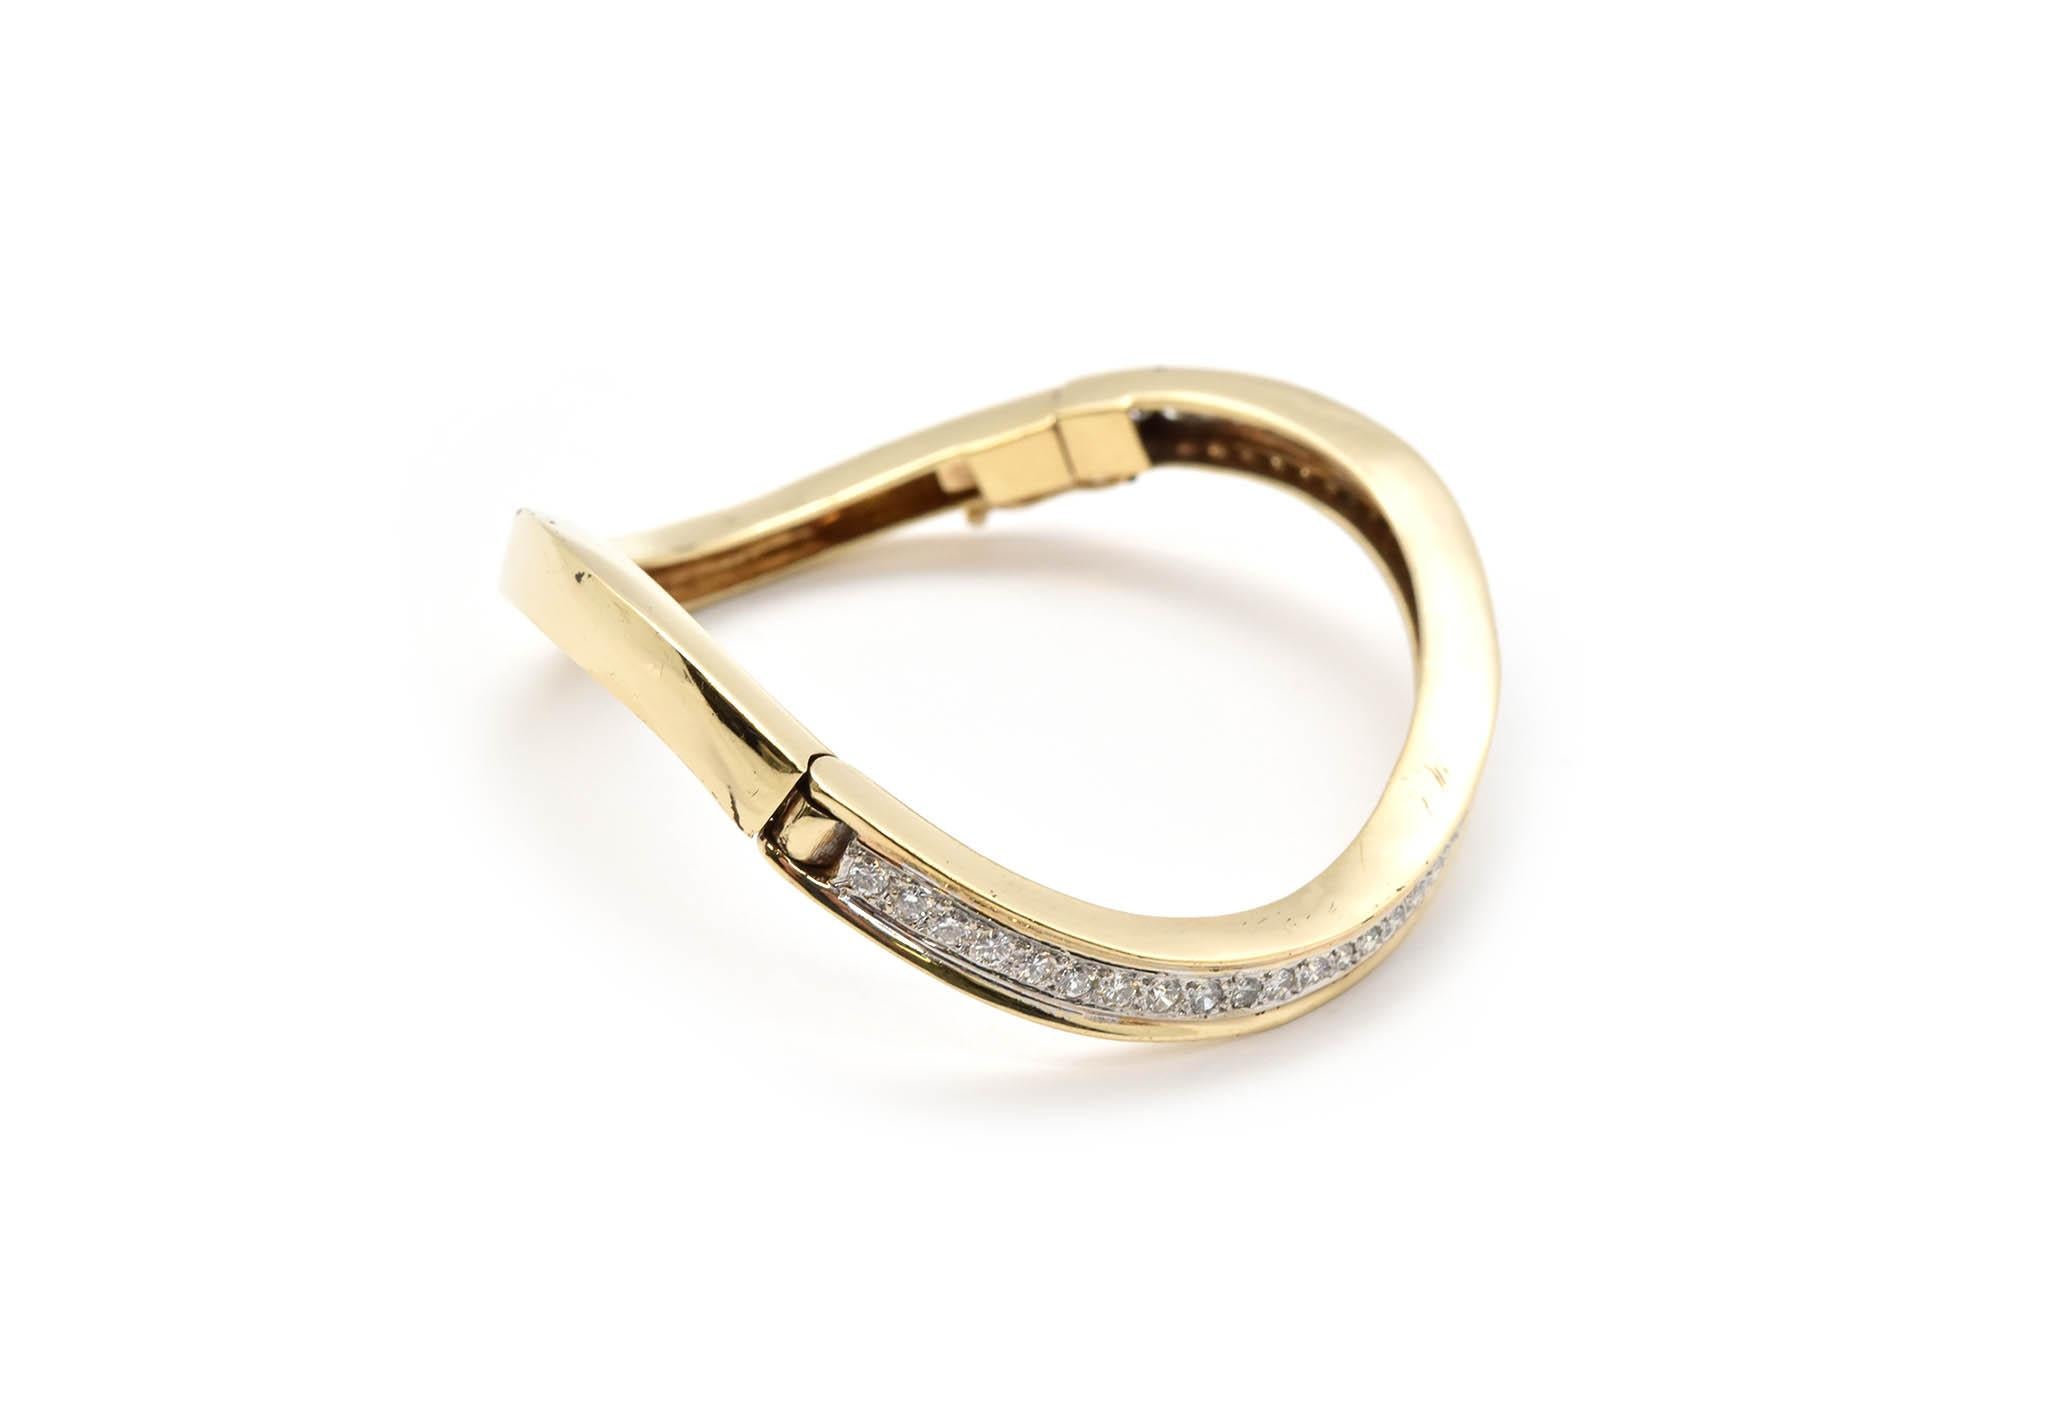 This twisted hinged bangle bracelet is composed of 14k yellow gold and 42 round brilliant VS diamonds! The bracelet is twisted and opens on hinges, making it perfect fit for the wrist! The 42 round diamonds are 1.68cttw and set on prongs, diamonds